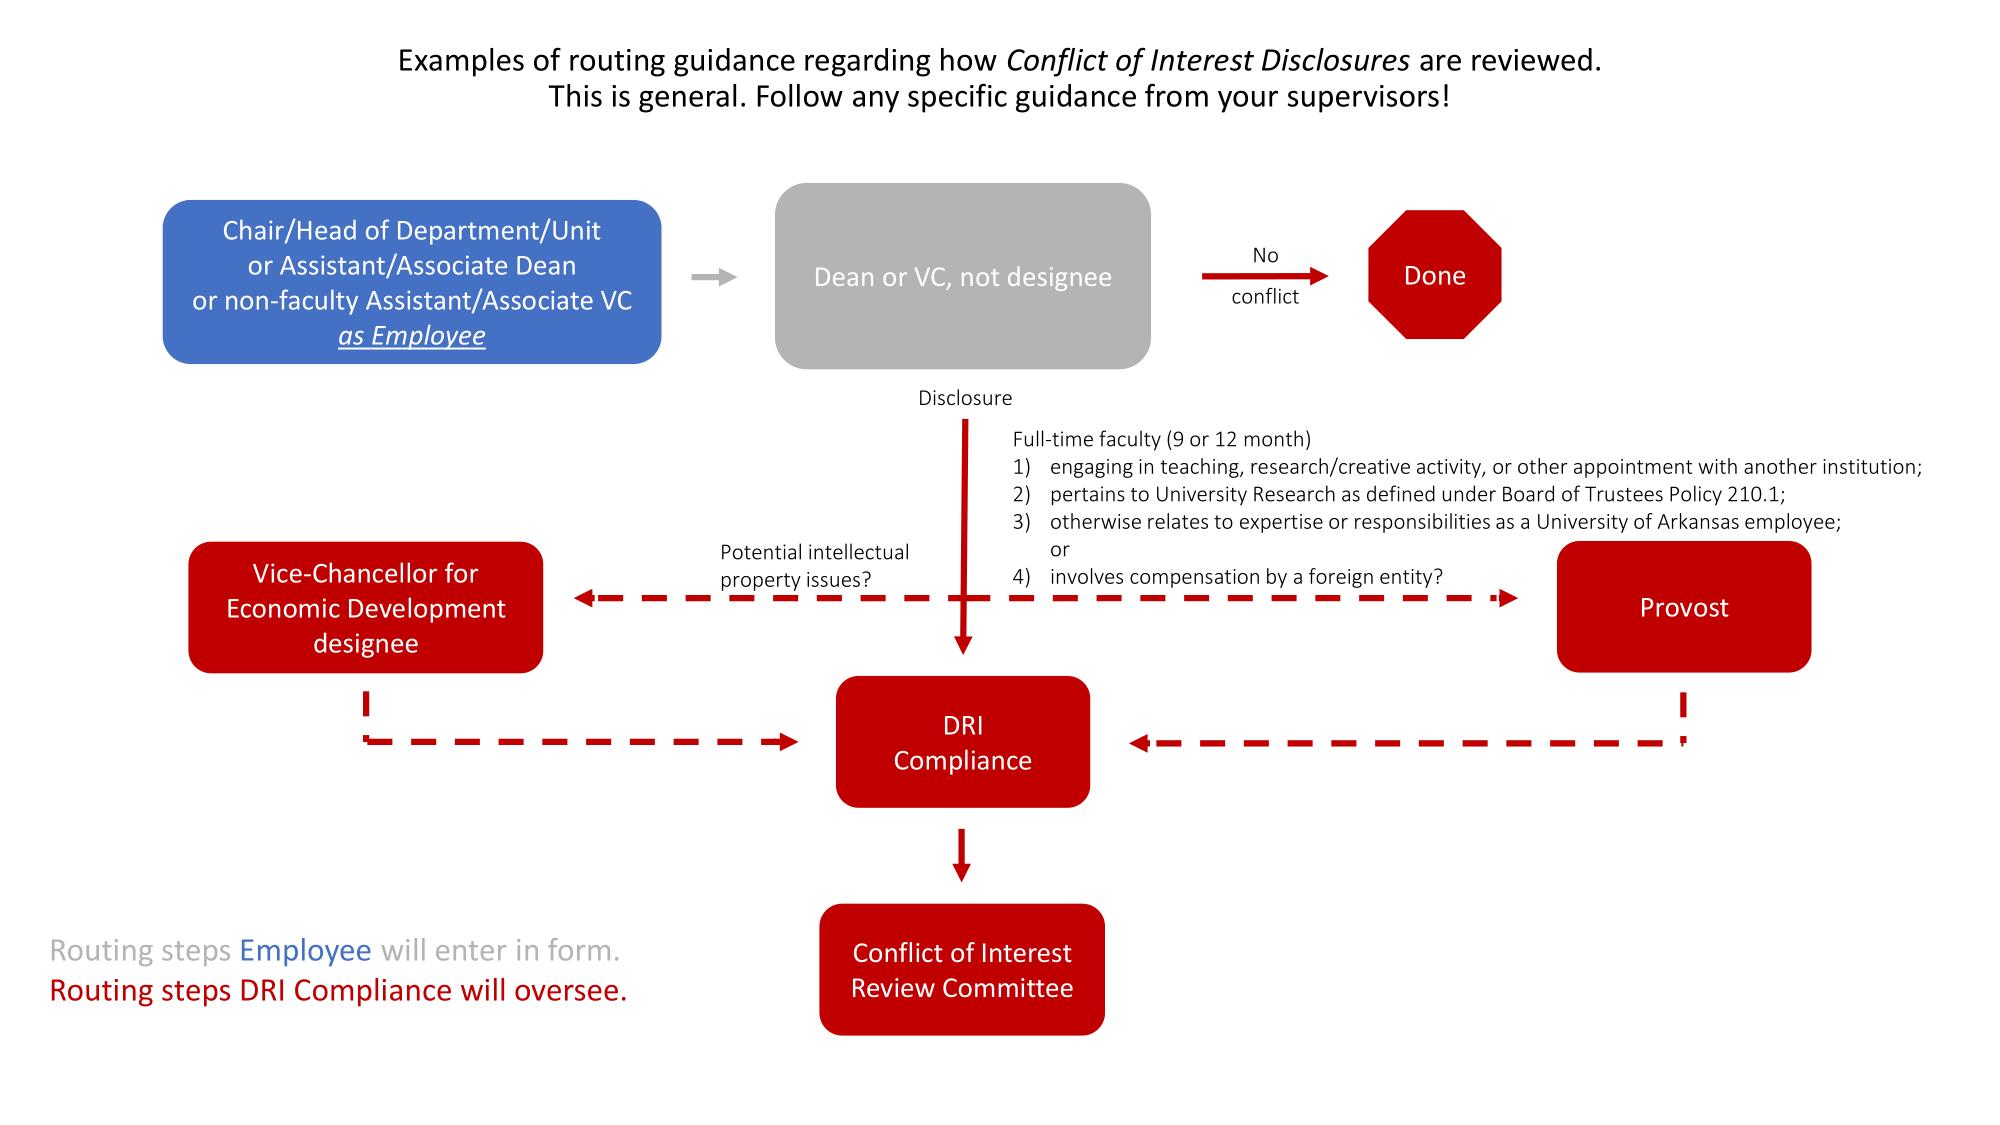 Examples of routing guidance for conflict of interest disclosures for head of department